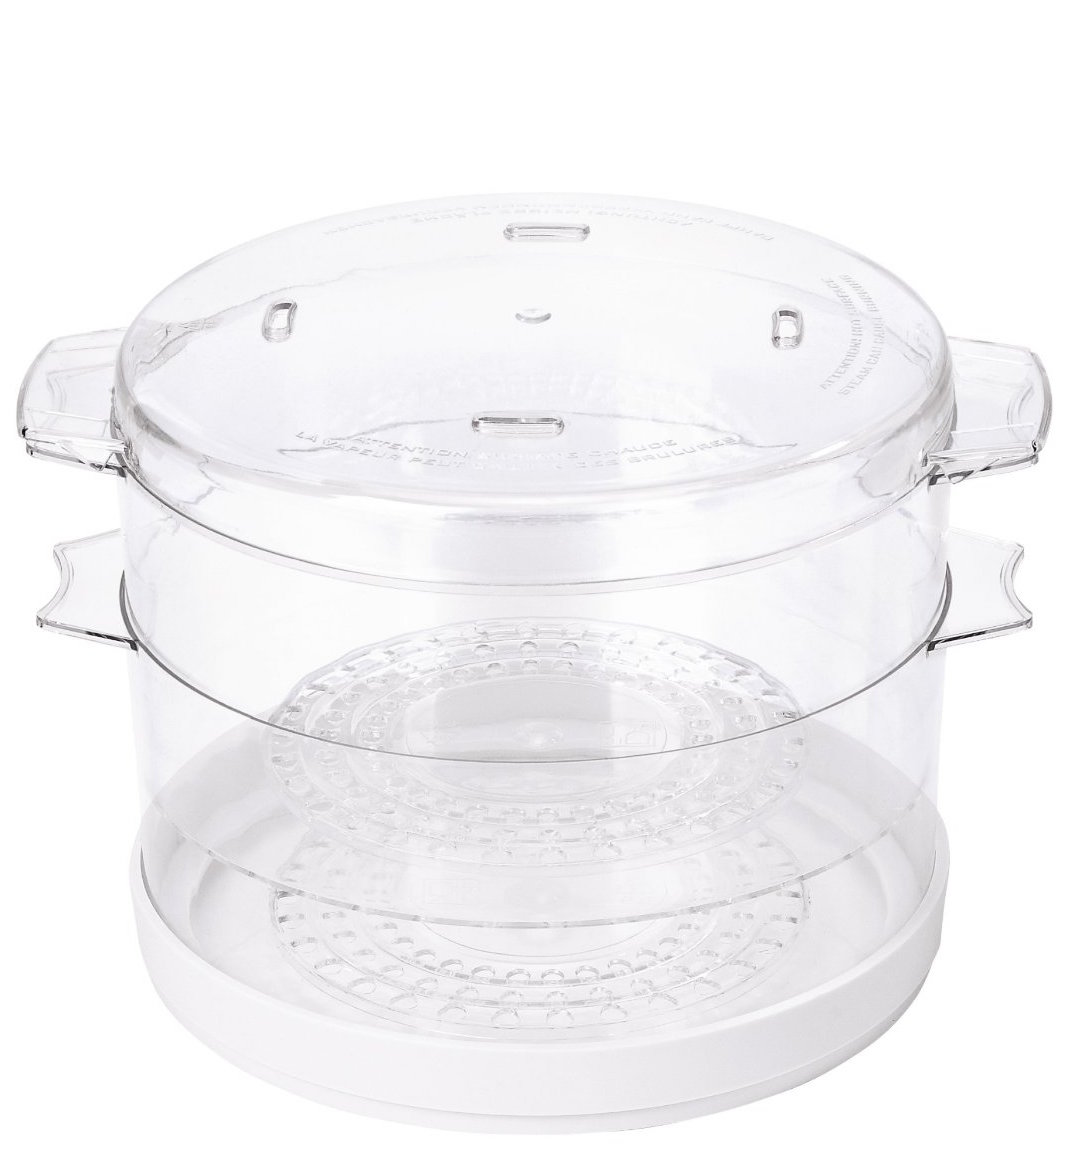 https://9to5toys.com/wp-content/uploads/sites/5/2015/07/oster-5-quart-food-steamer-in-white-ckststmd5-w-sale-02.jpg